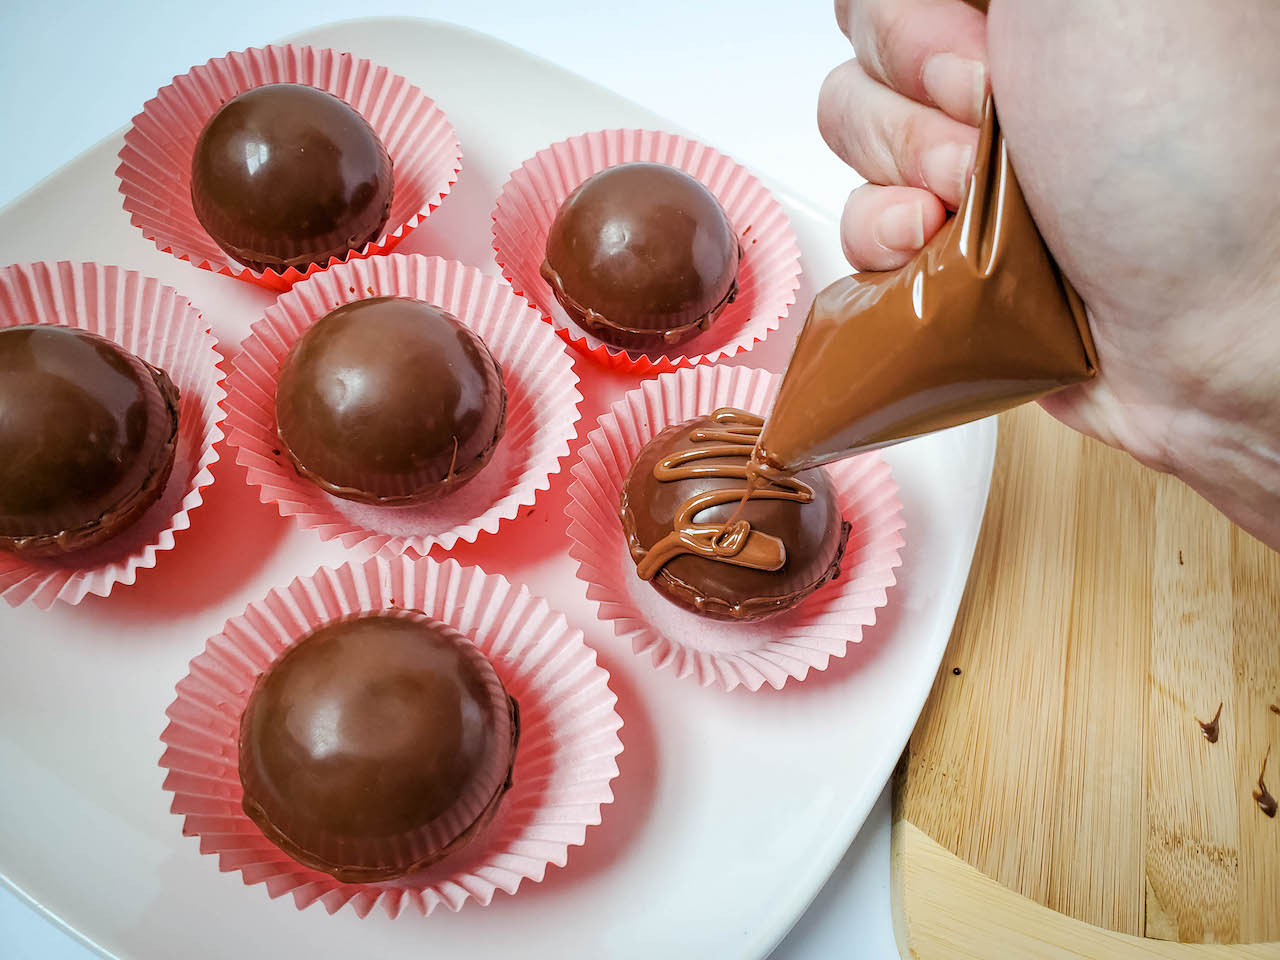 process shot - chocolate being drizzled on top of chocolate balls